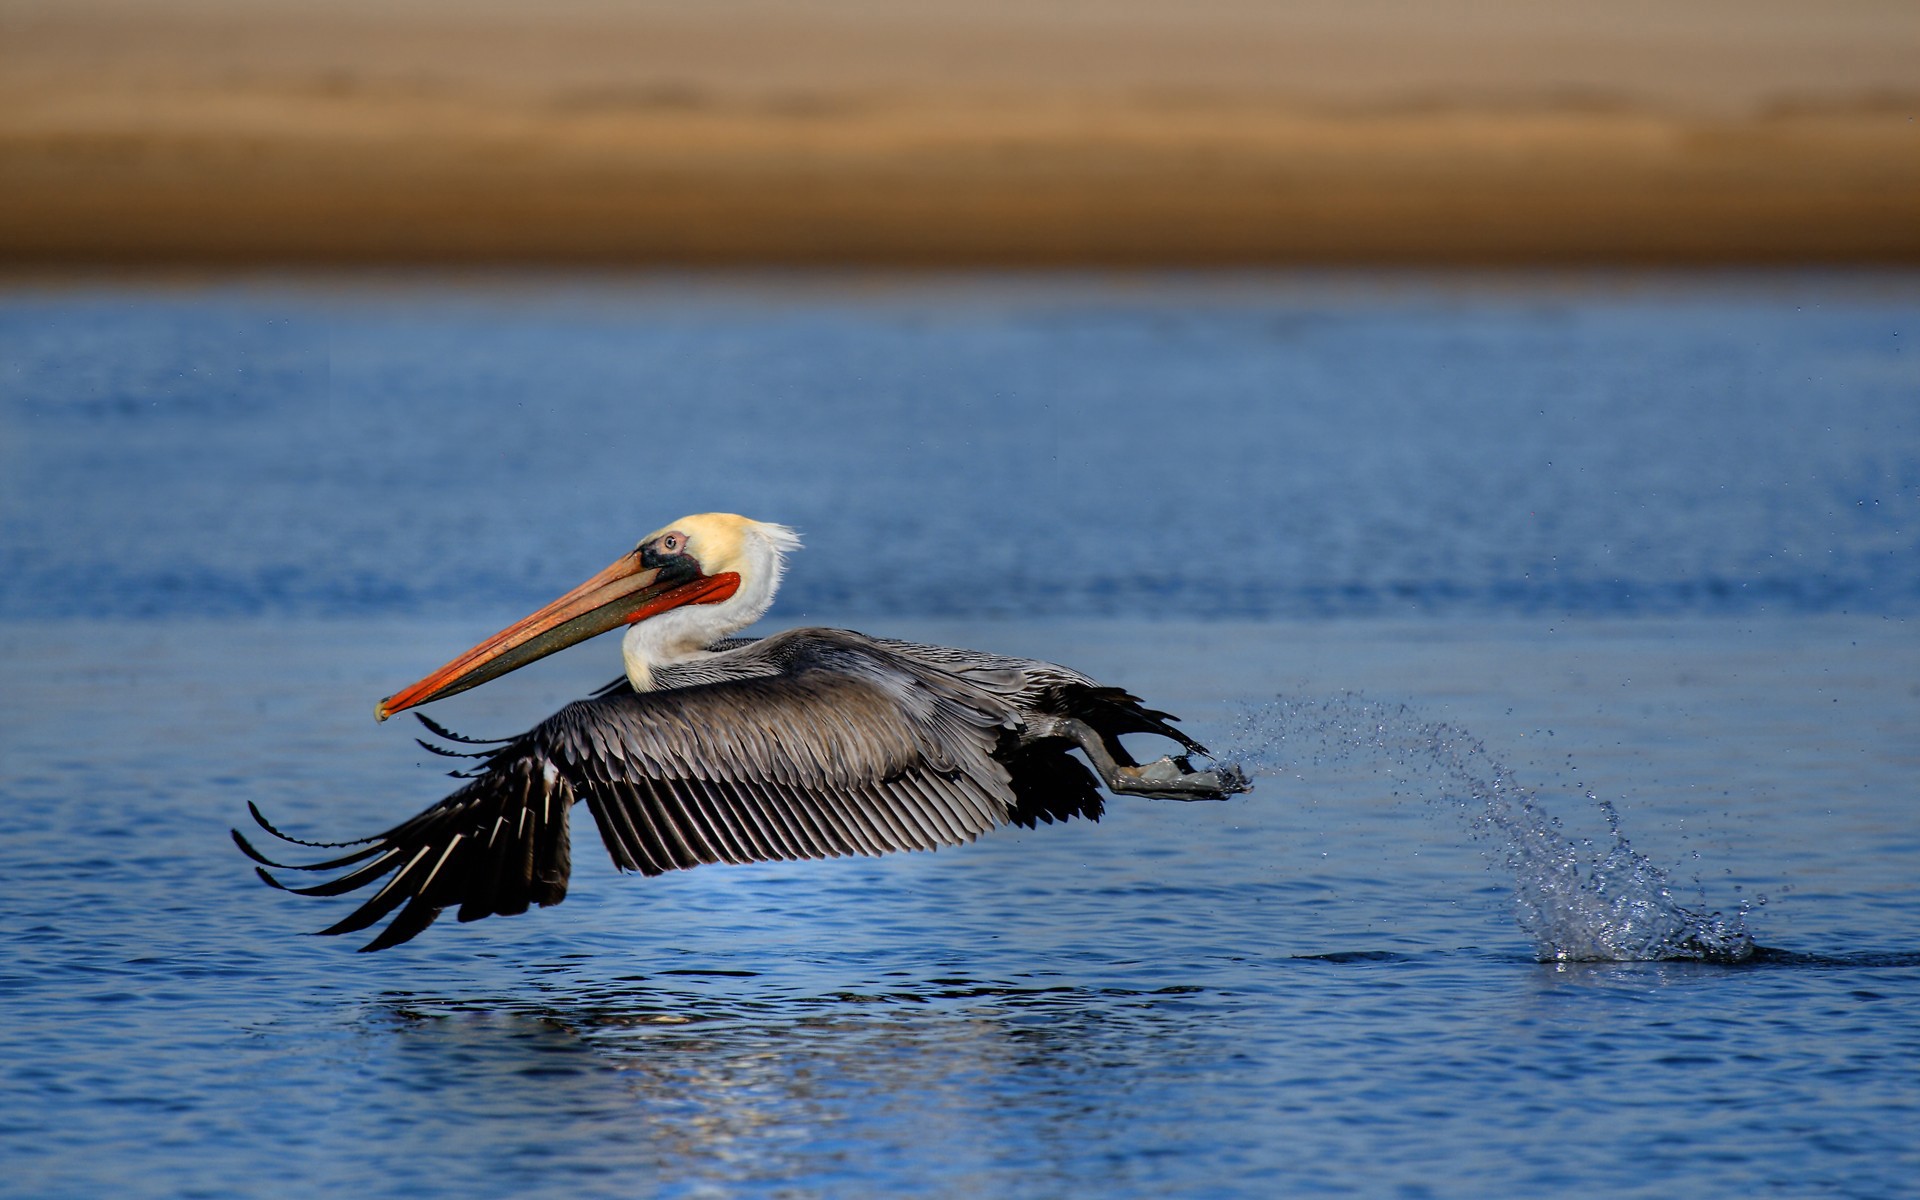 Pelican HD Wallpaper | Background Image | 1920x1200 - Wallpaper Abyss